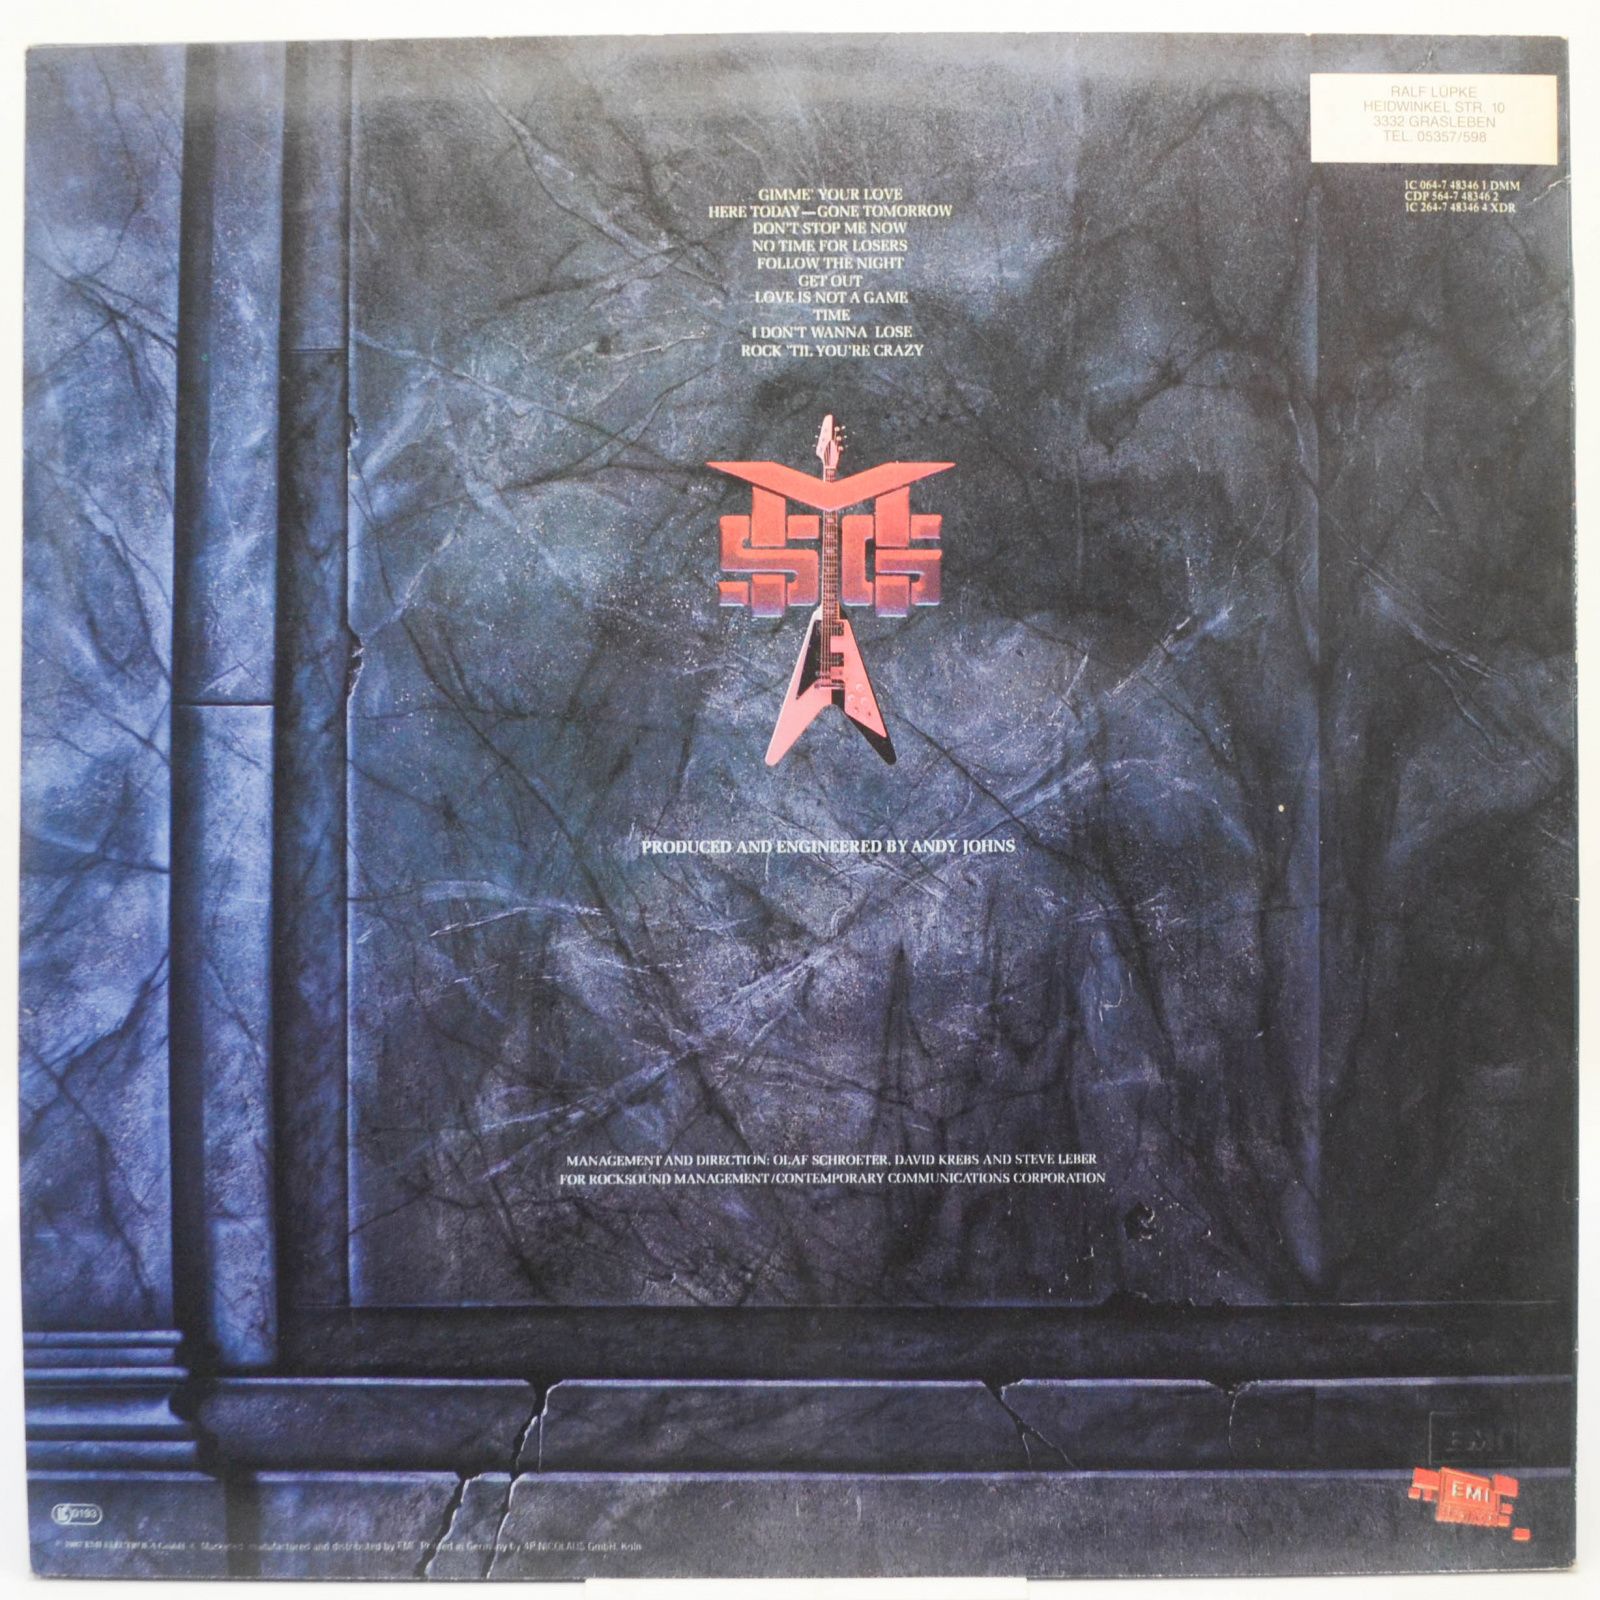 McAuley Schenker Group — Perfect Timing, 1987